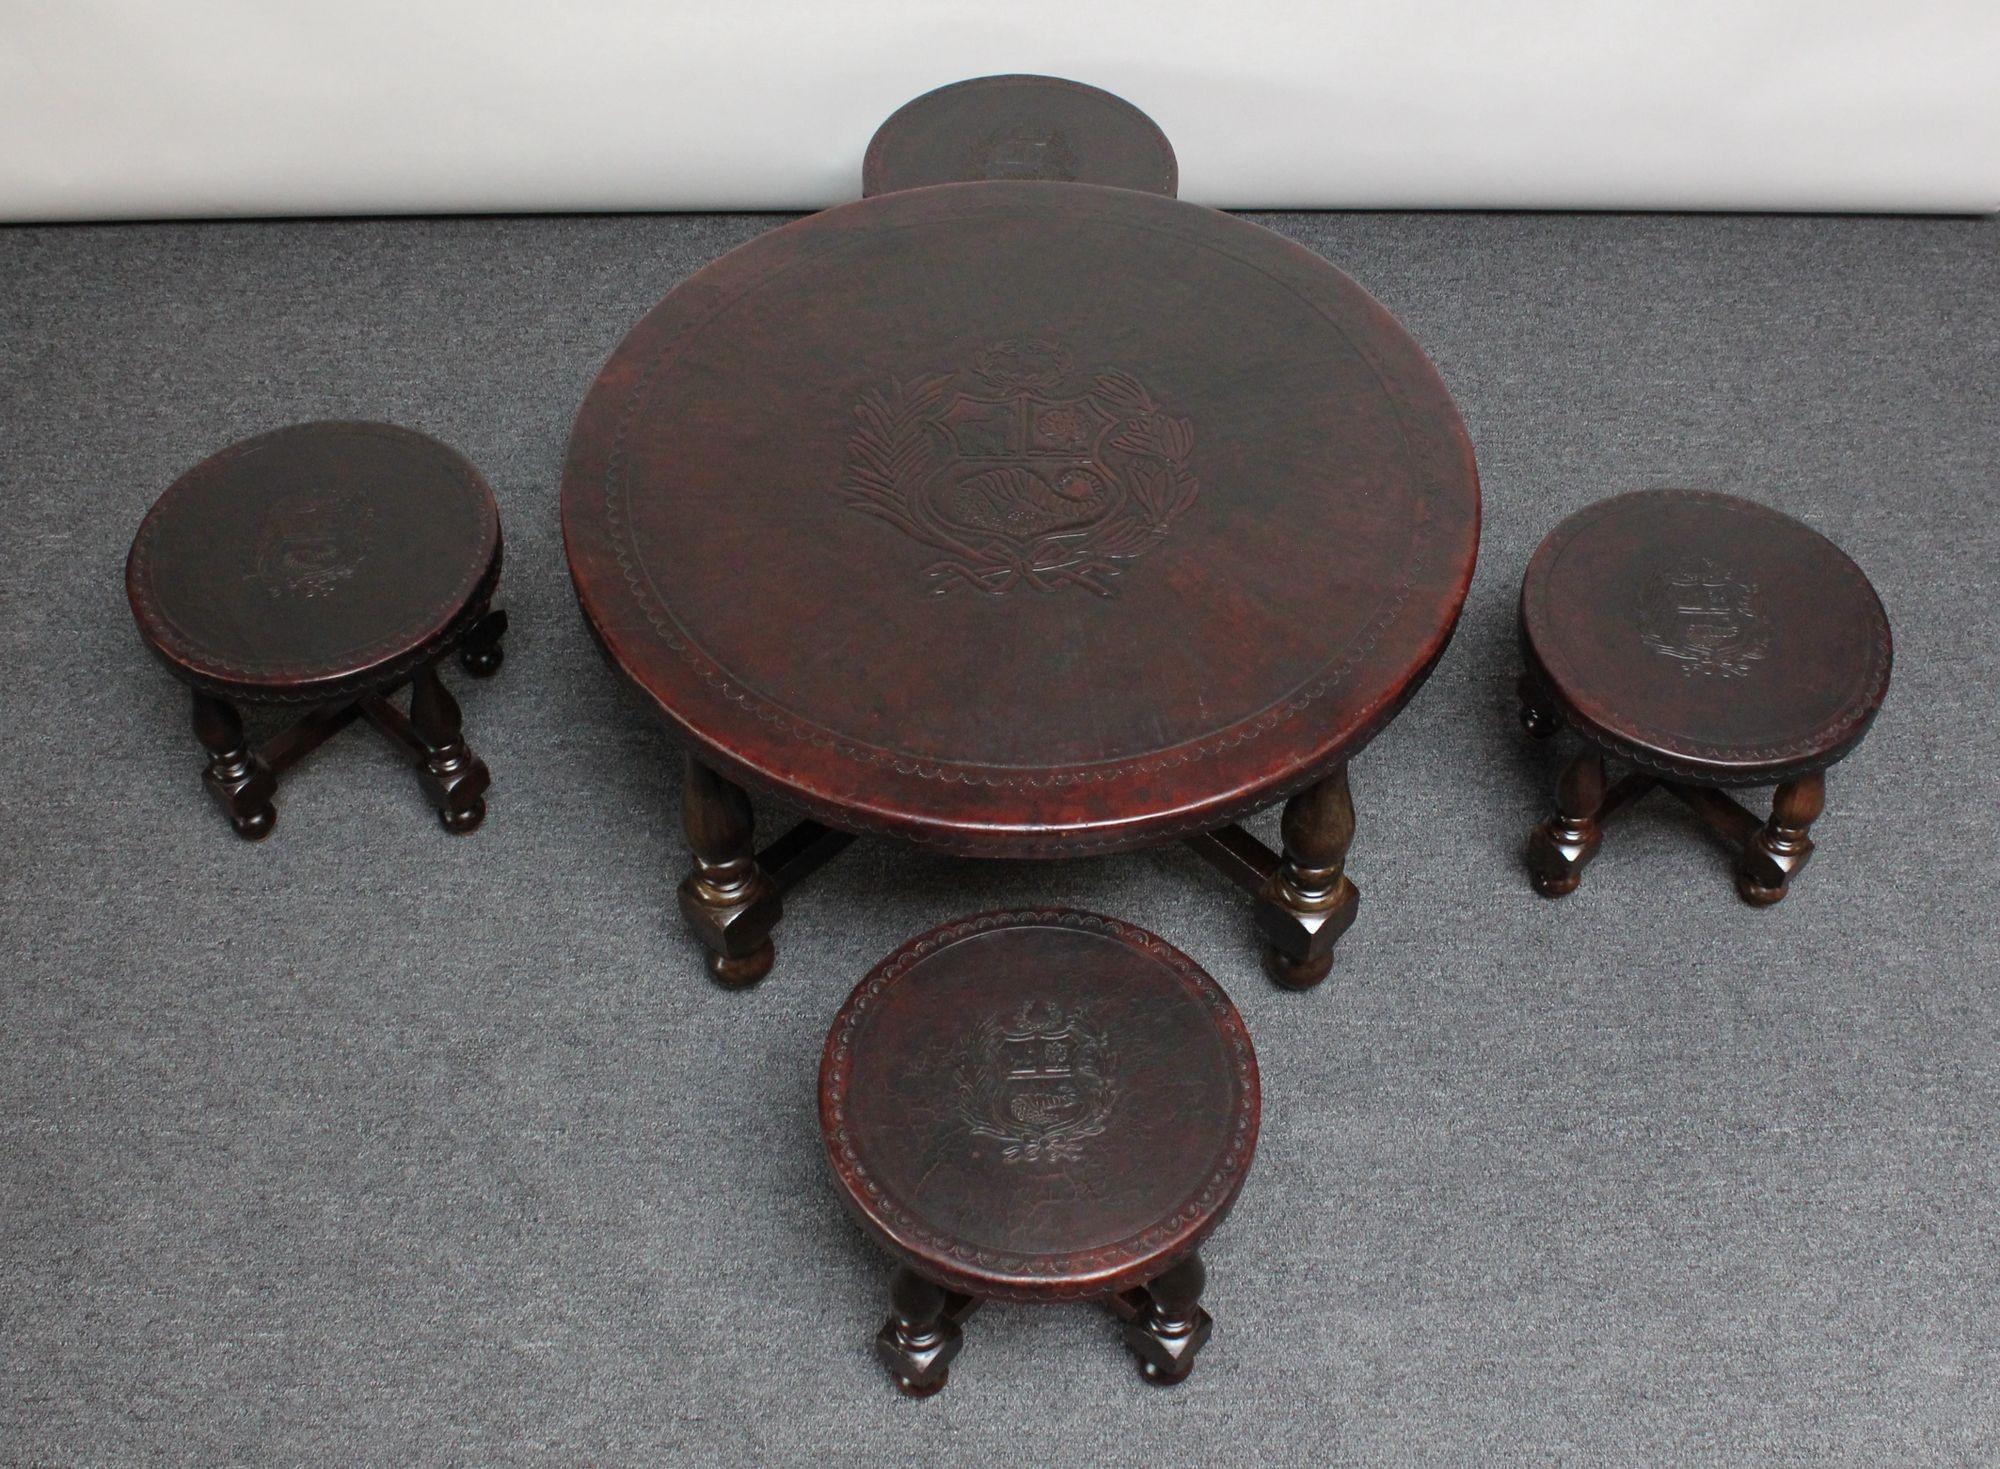 Embossed leather and stained mahogany coffee/cocktail table and four nesting stools depicting the Peruvian coat of arms since 1825 and embellished with tooled 'wave' border pattern (ca. 1950, Peru). The coat of arms features a shield bearing a